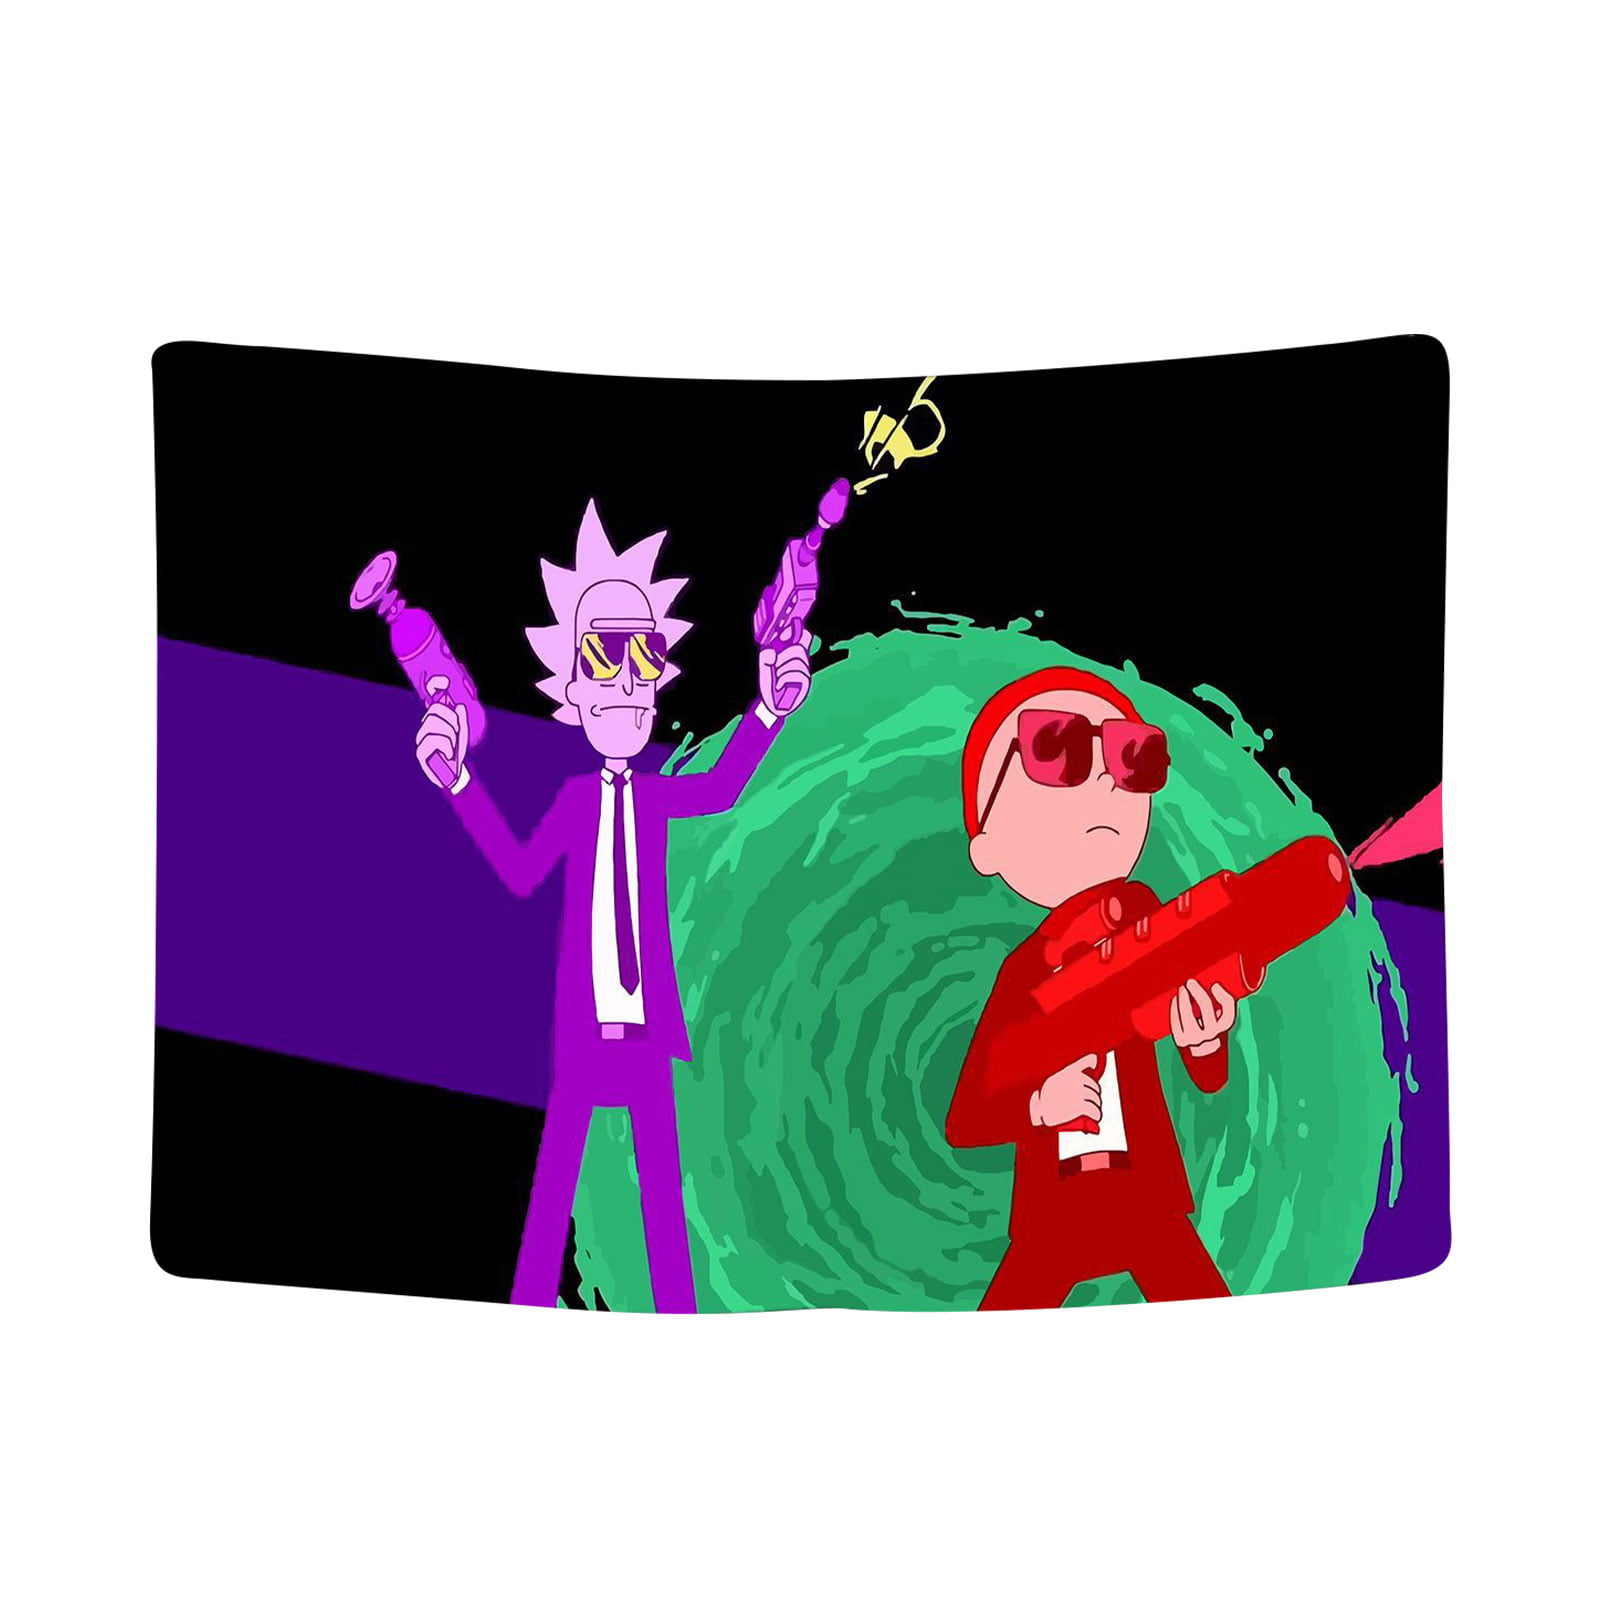 Spiritual Leader Rick Poster Psychedelic Rick and Morty Tapestry Wall Art